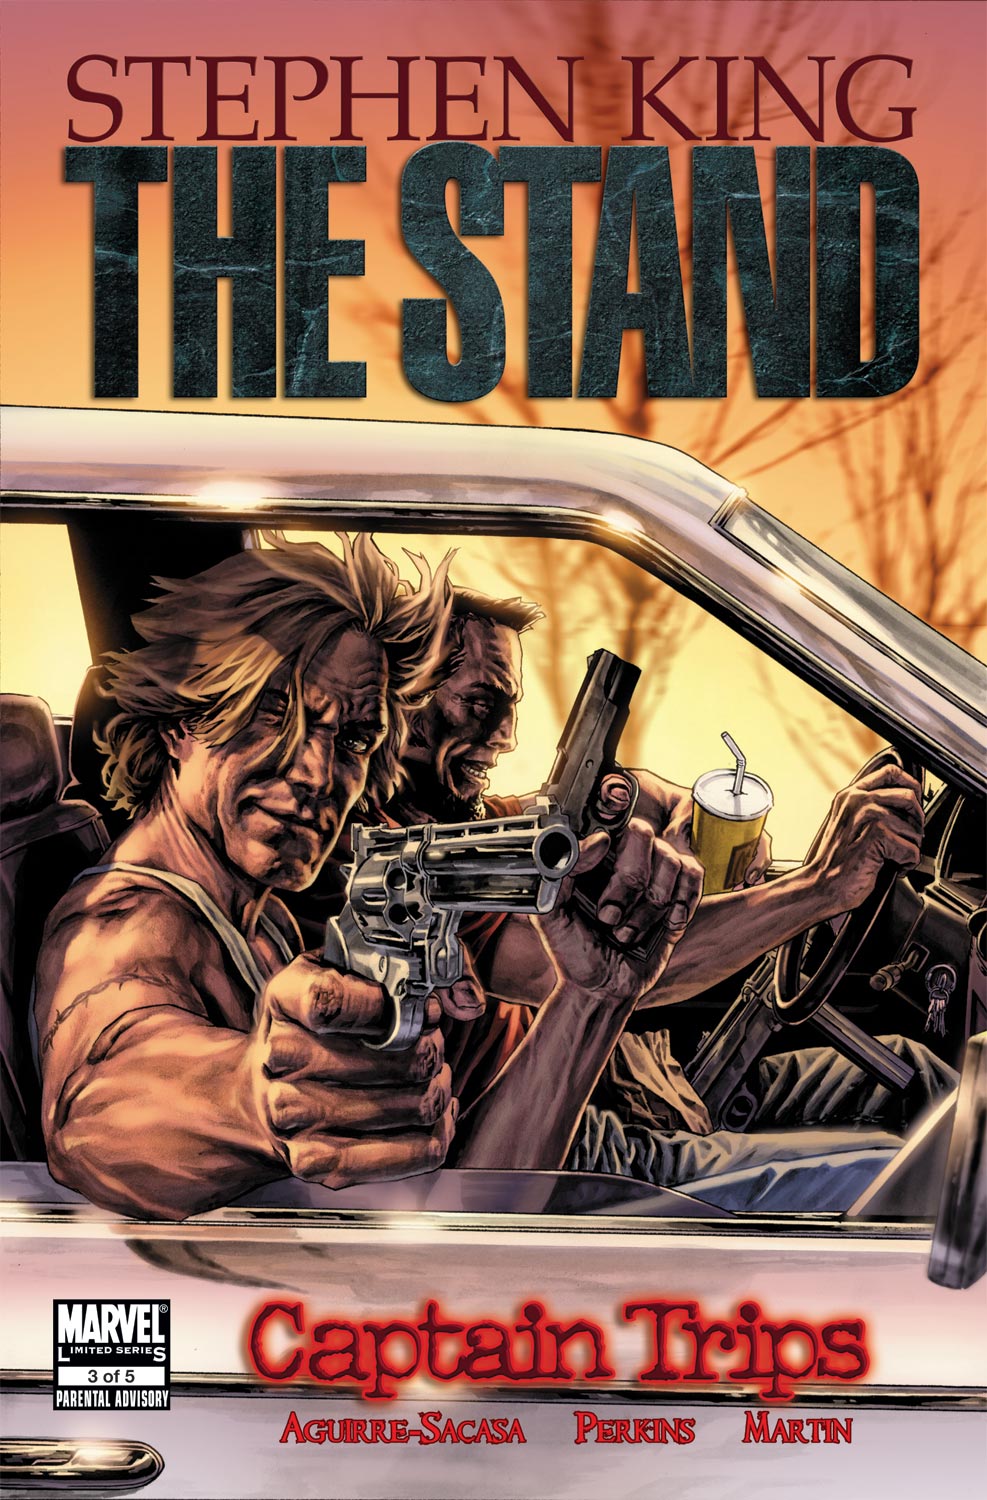 The Stand: Captain Trips (2008) #3